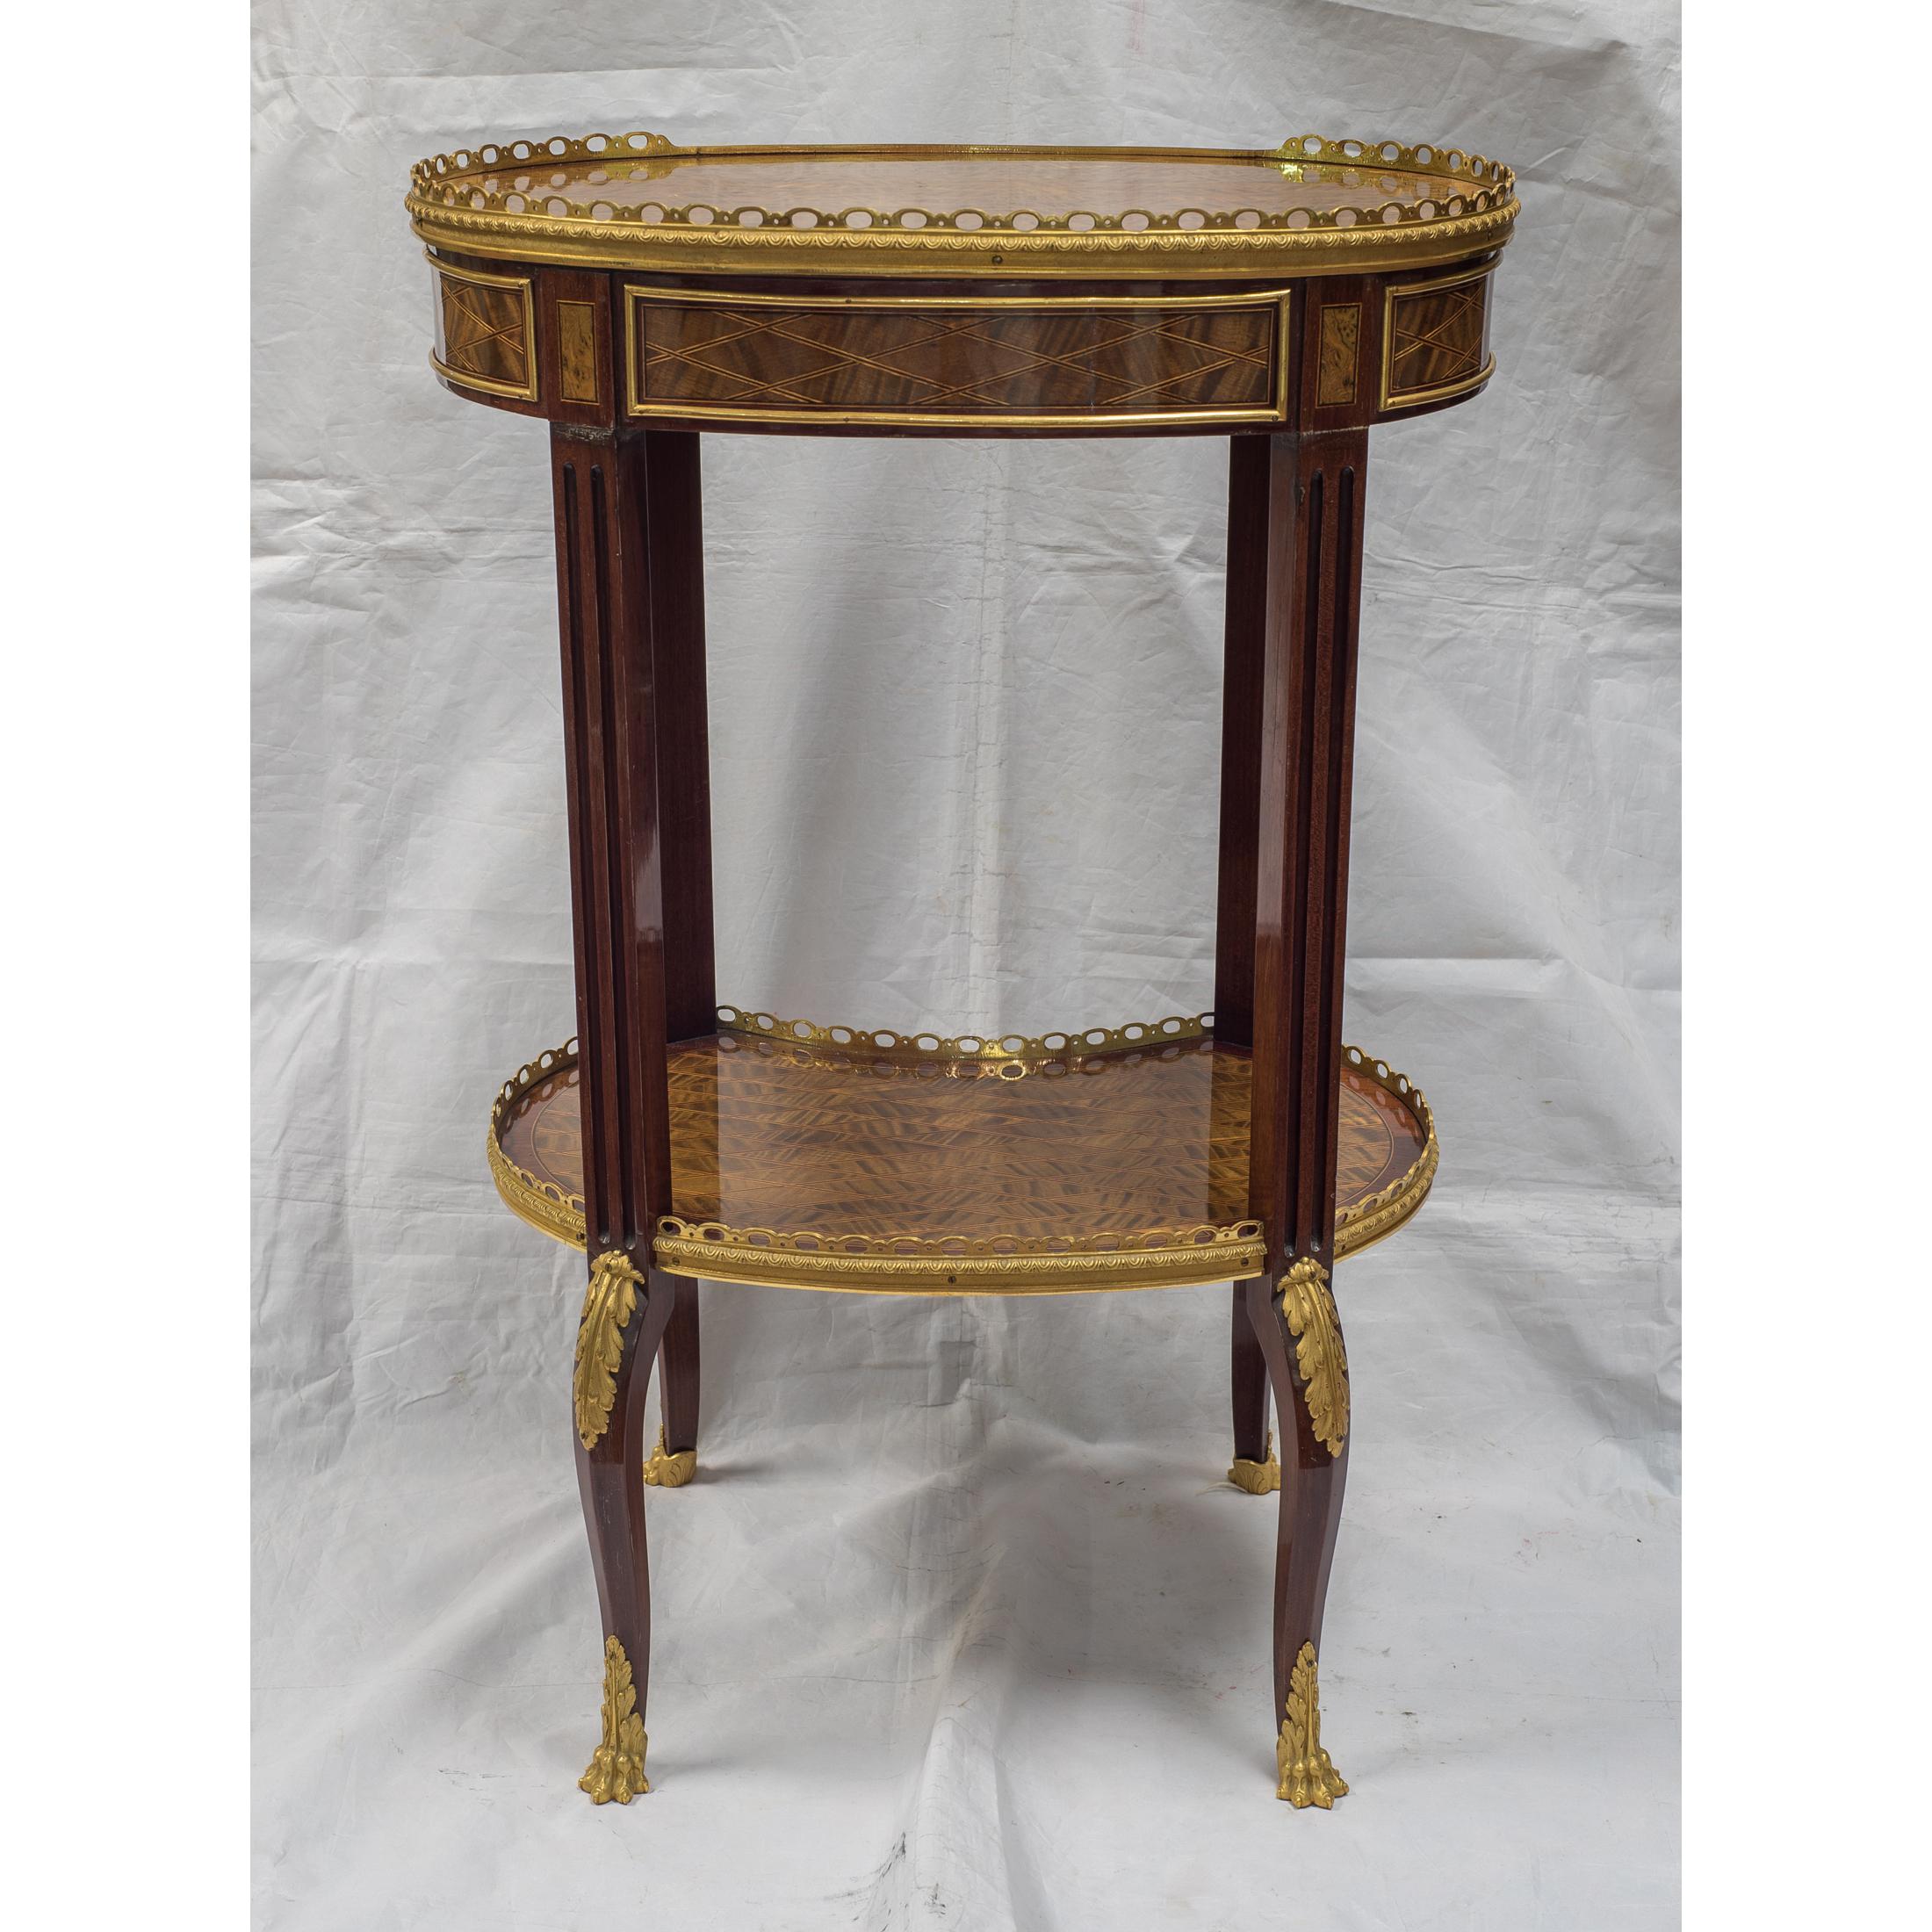 A stunning Louis XV-style ormolu-mounted inlaid tulipwood and mahogany galleried oval top table. The trelliswork inlaid three-quarter galleried oval top above a frieze drawer on fluted supports joined by a concave fronted platform stretcher, raised